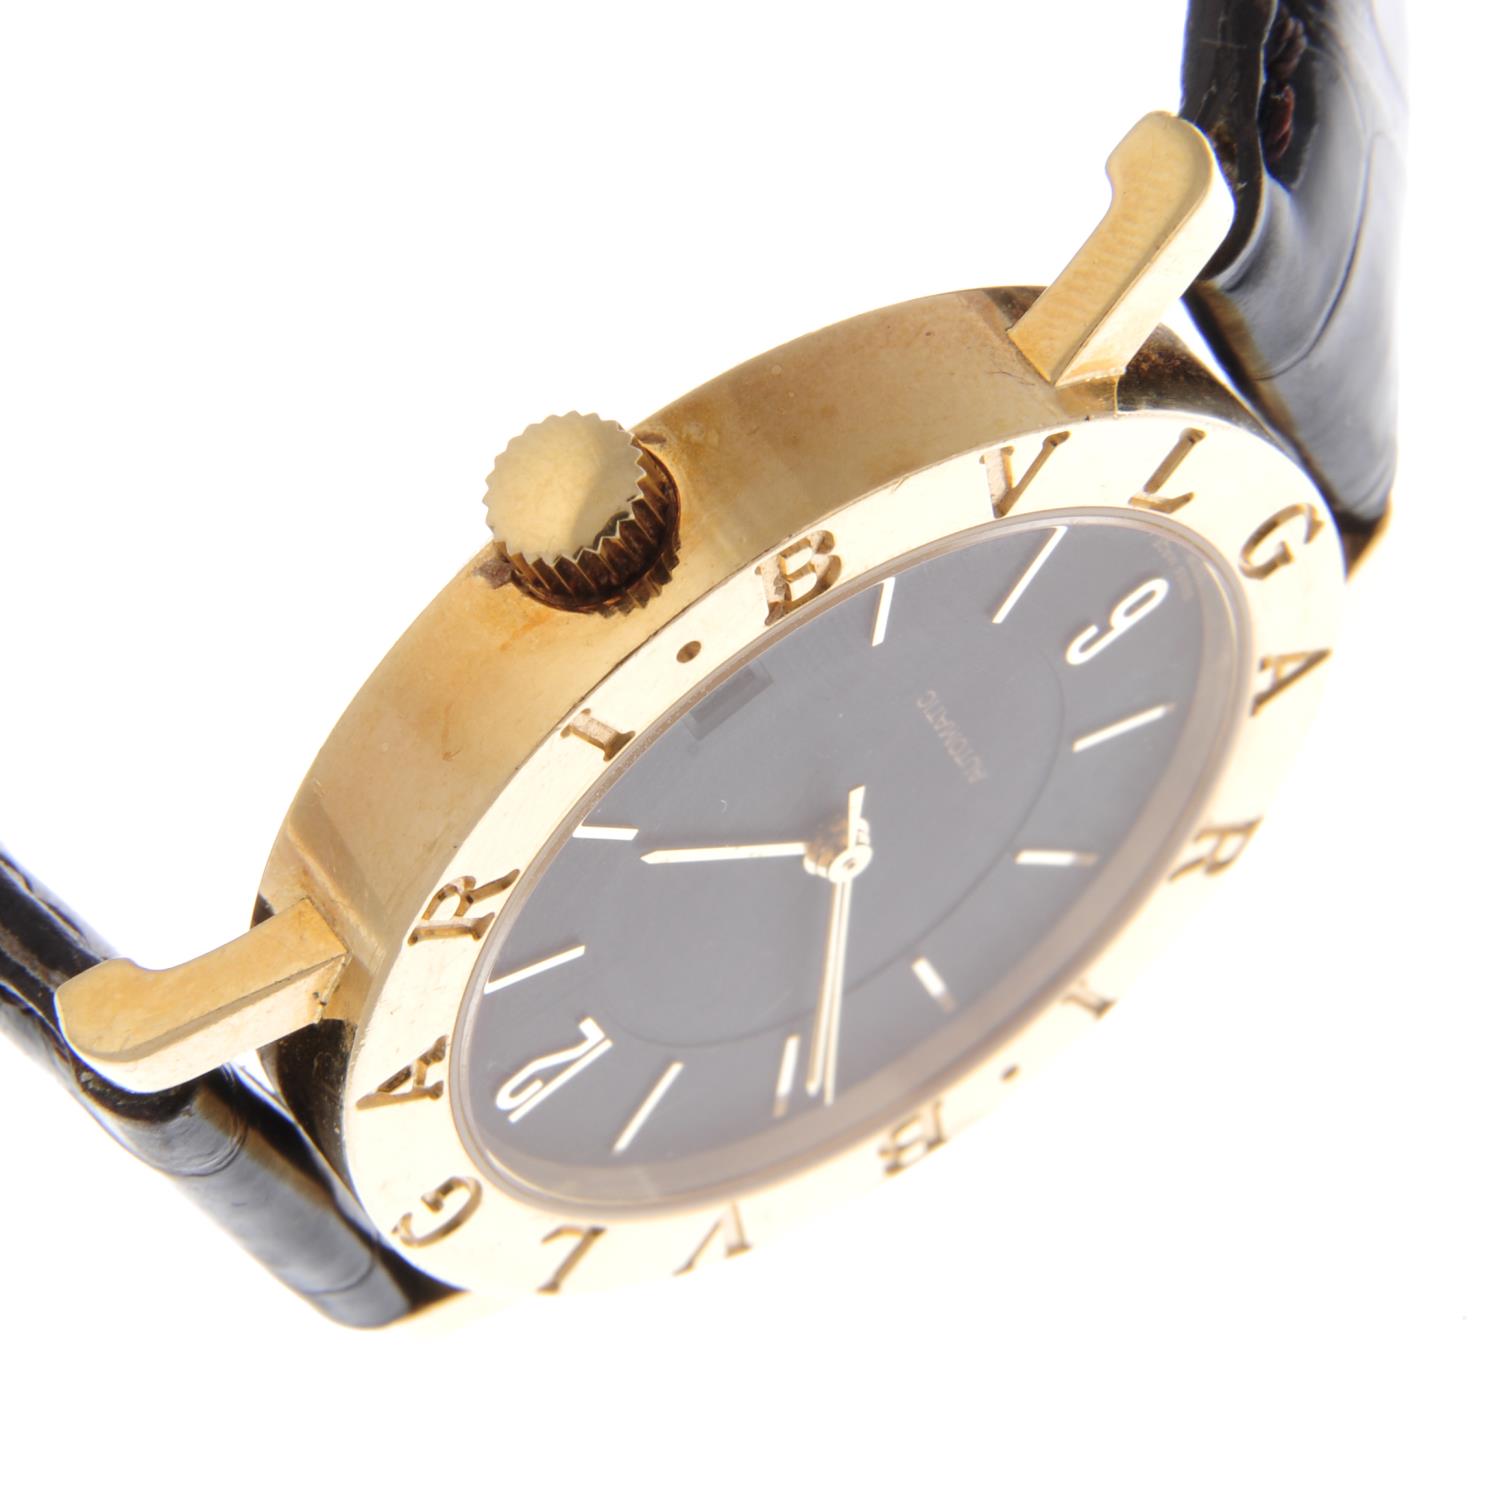 BULGARI - a gentleman's wrist watch. 18ct yellow gold case. Reference BB33GL, serial P.1218. - Image 5 of 5